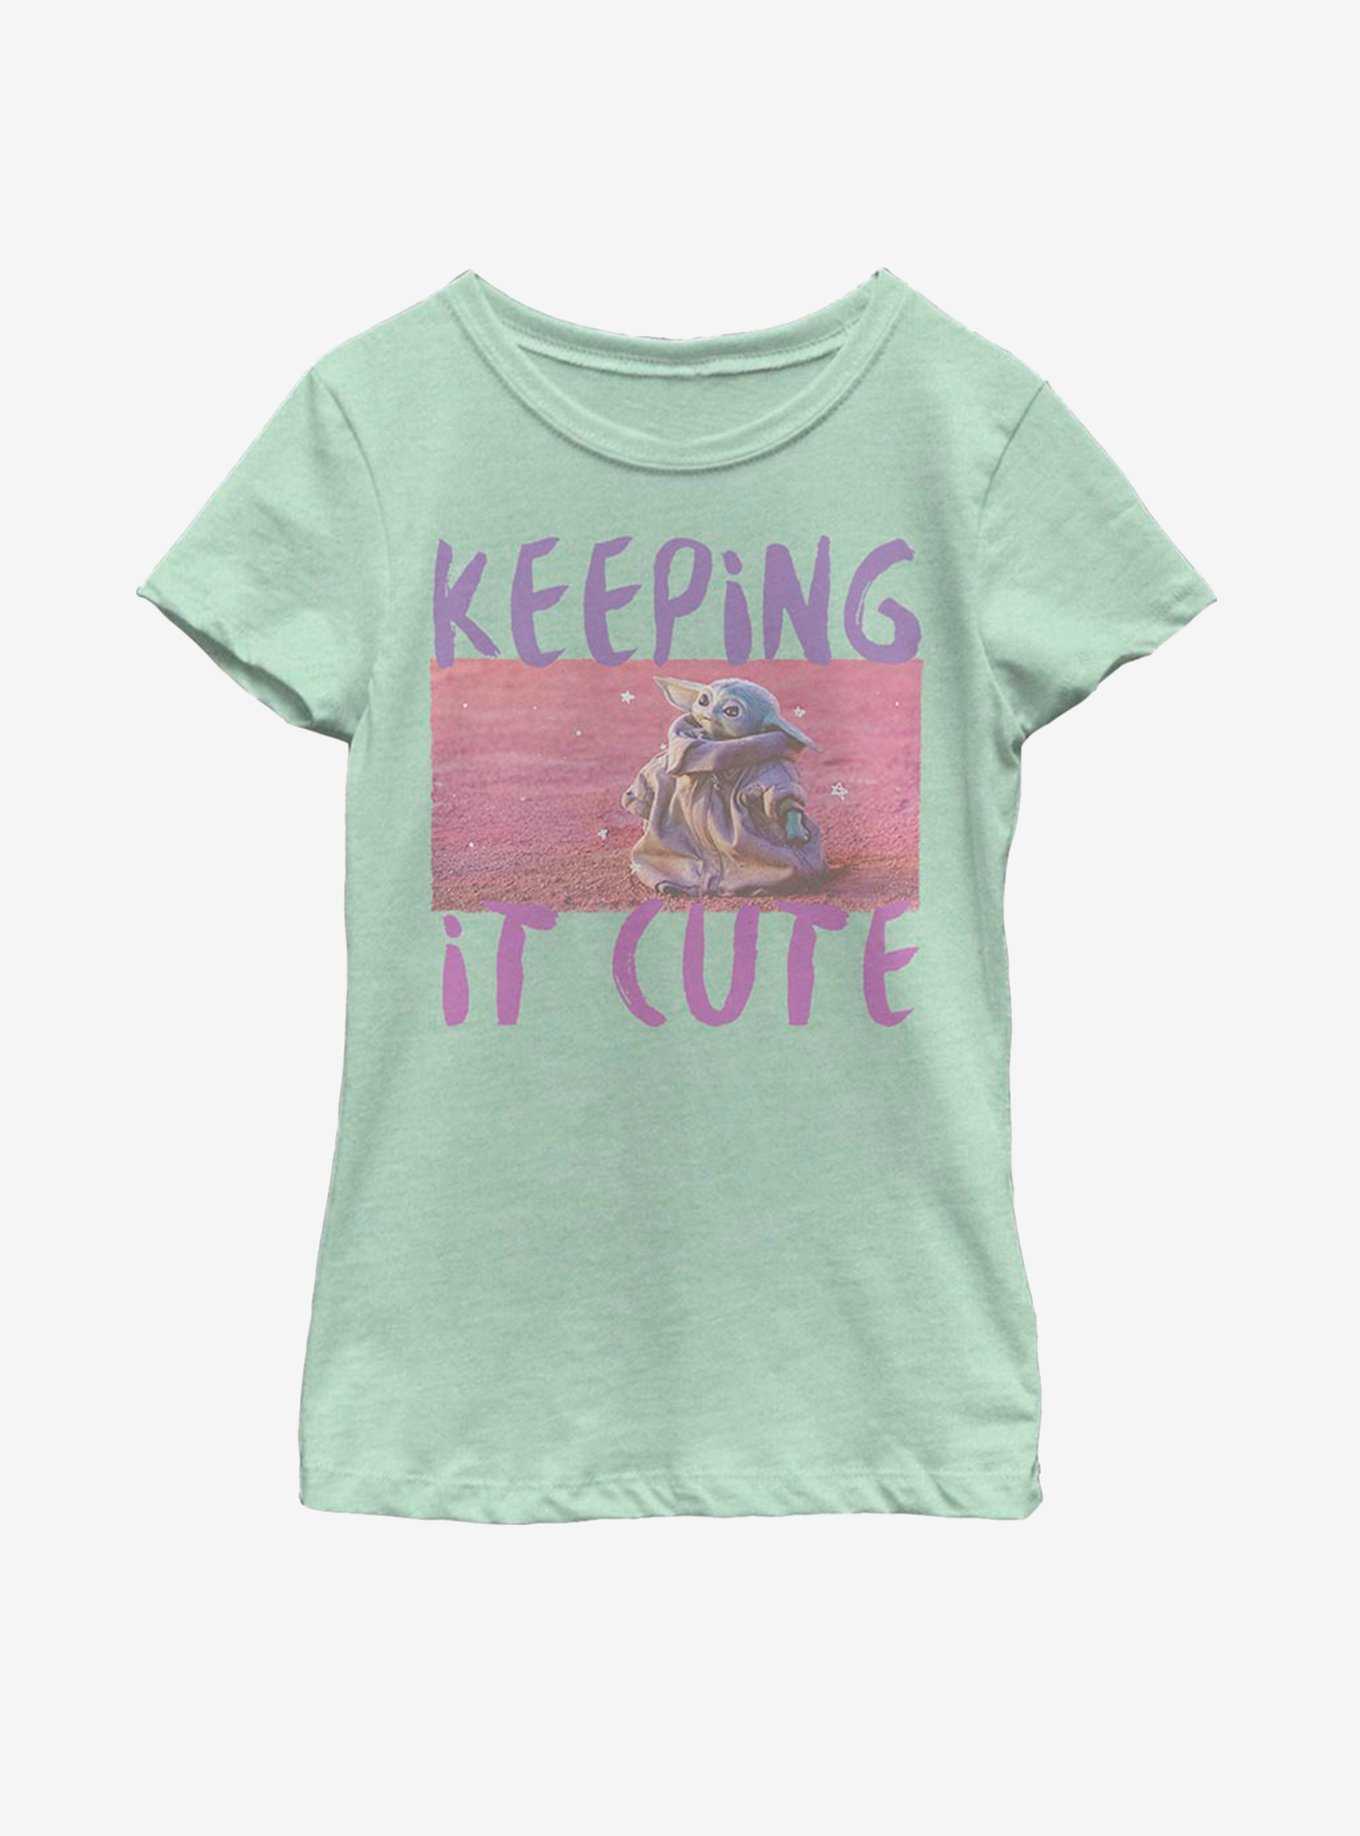 Star Wars The Mandalorian The Child Keeping It Cute Youth Girls T-Shirt, , hi-res